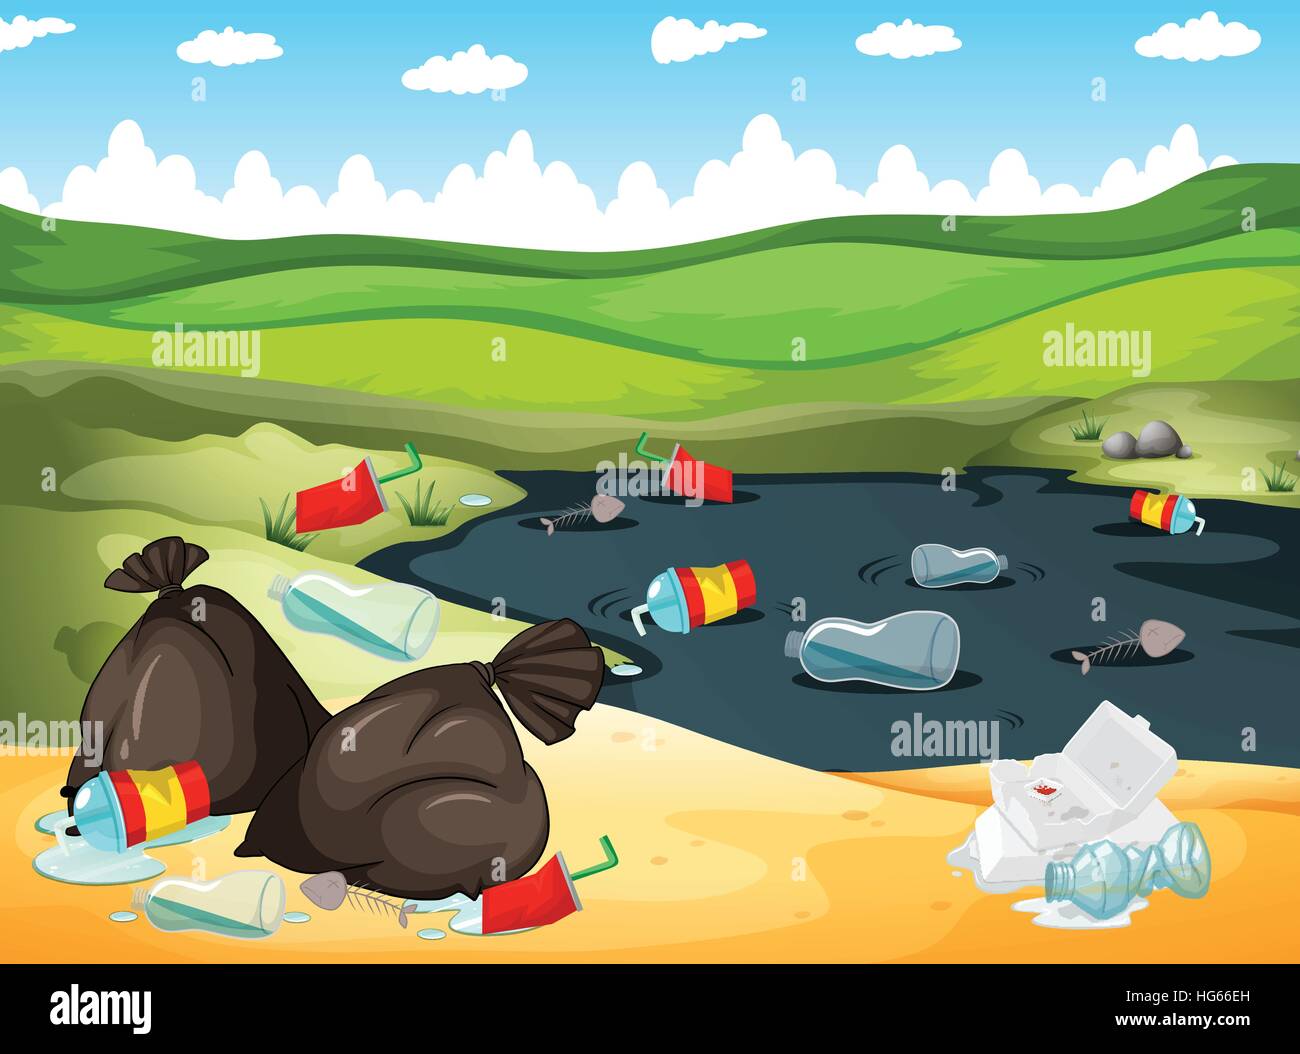 Rubbish in river and on the ground illustration Stock Vector Image ...